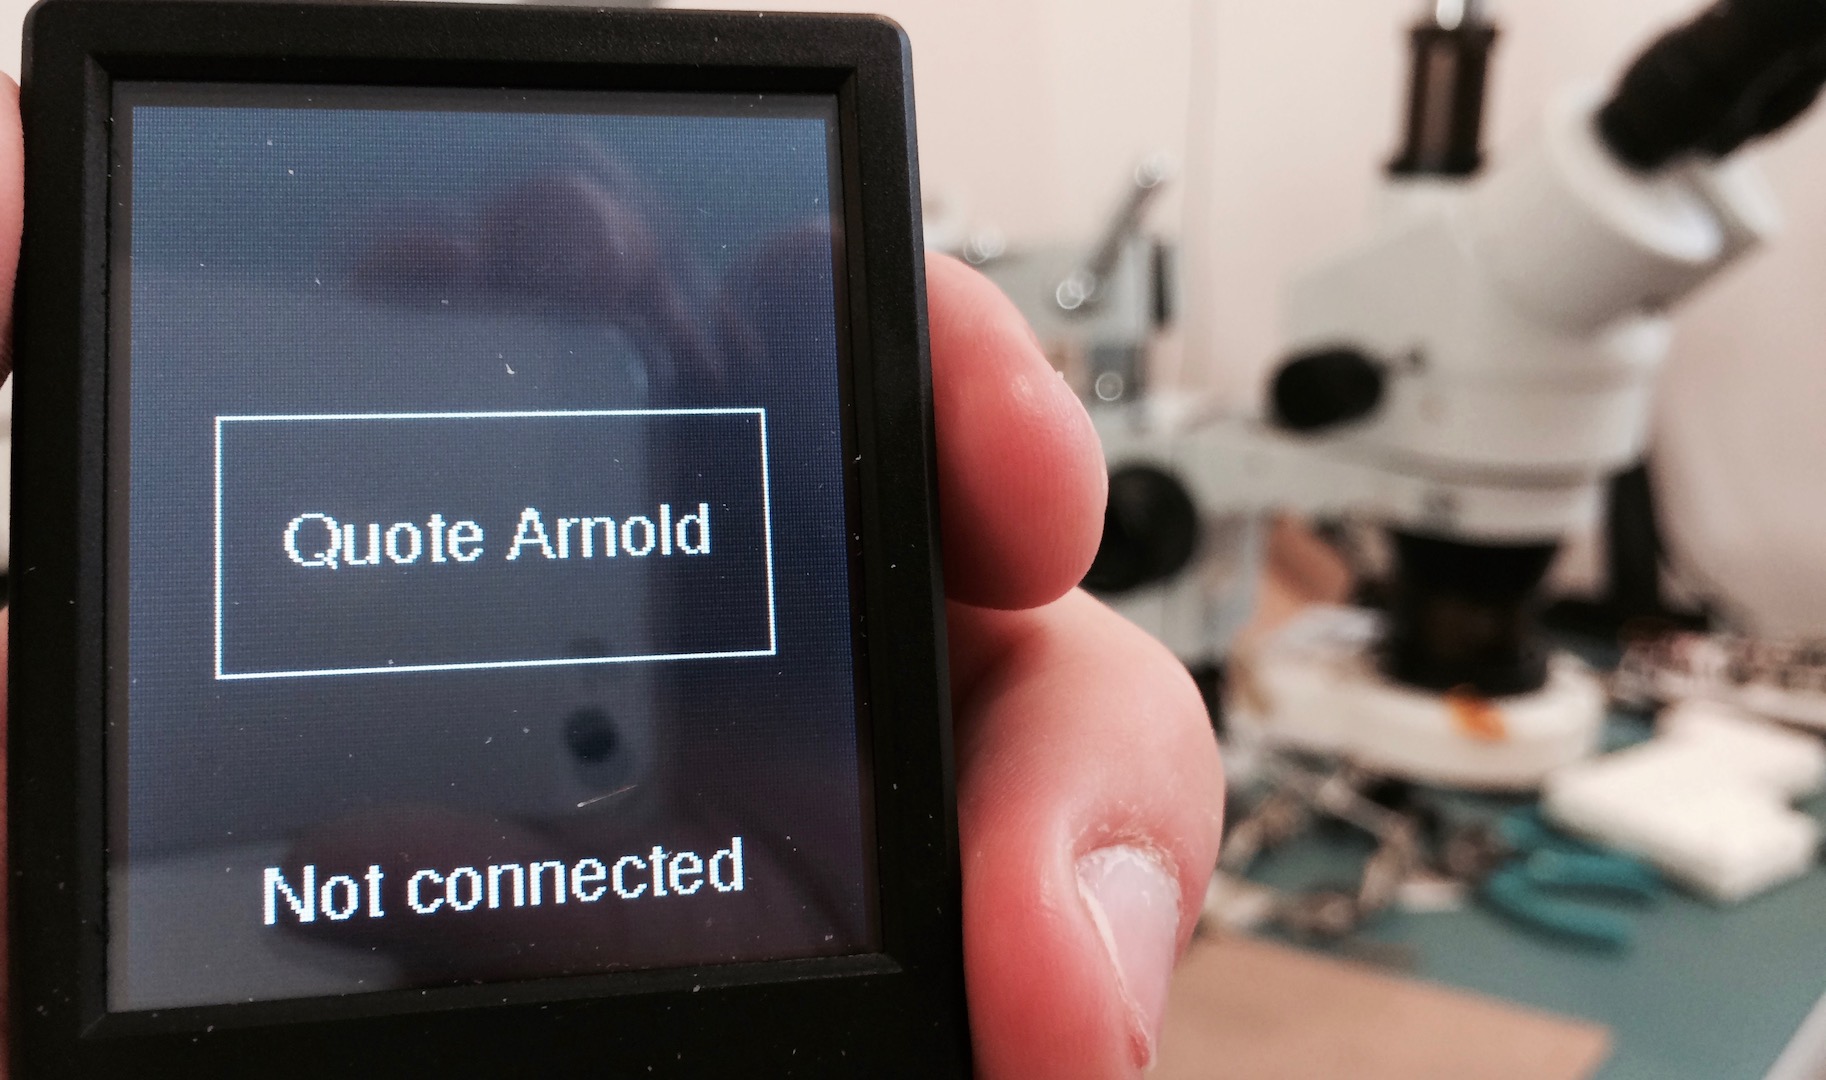 Mono running the app, with the button and text visible